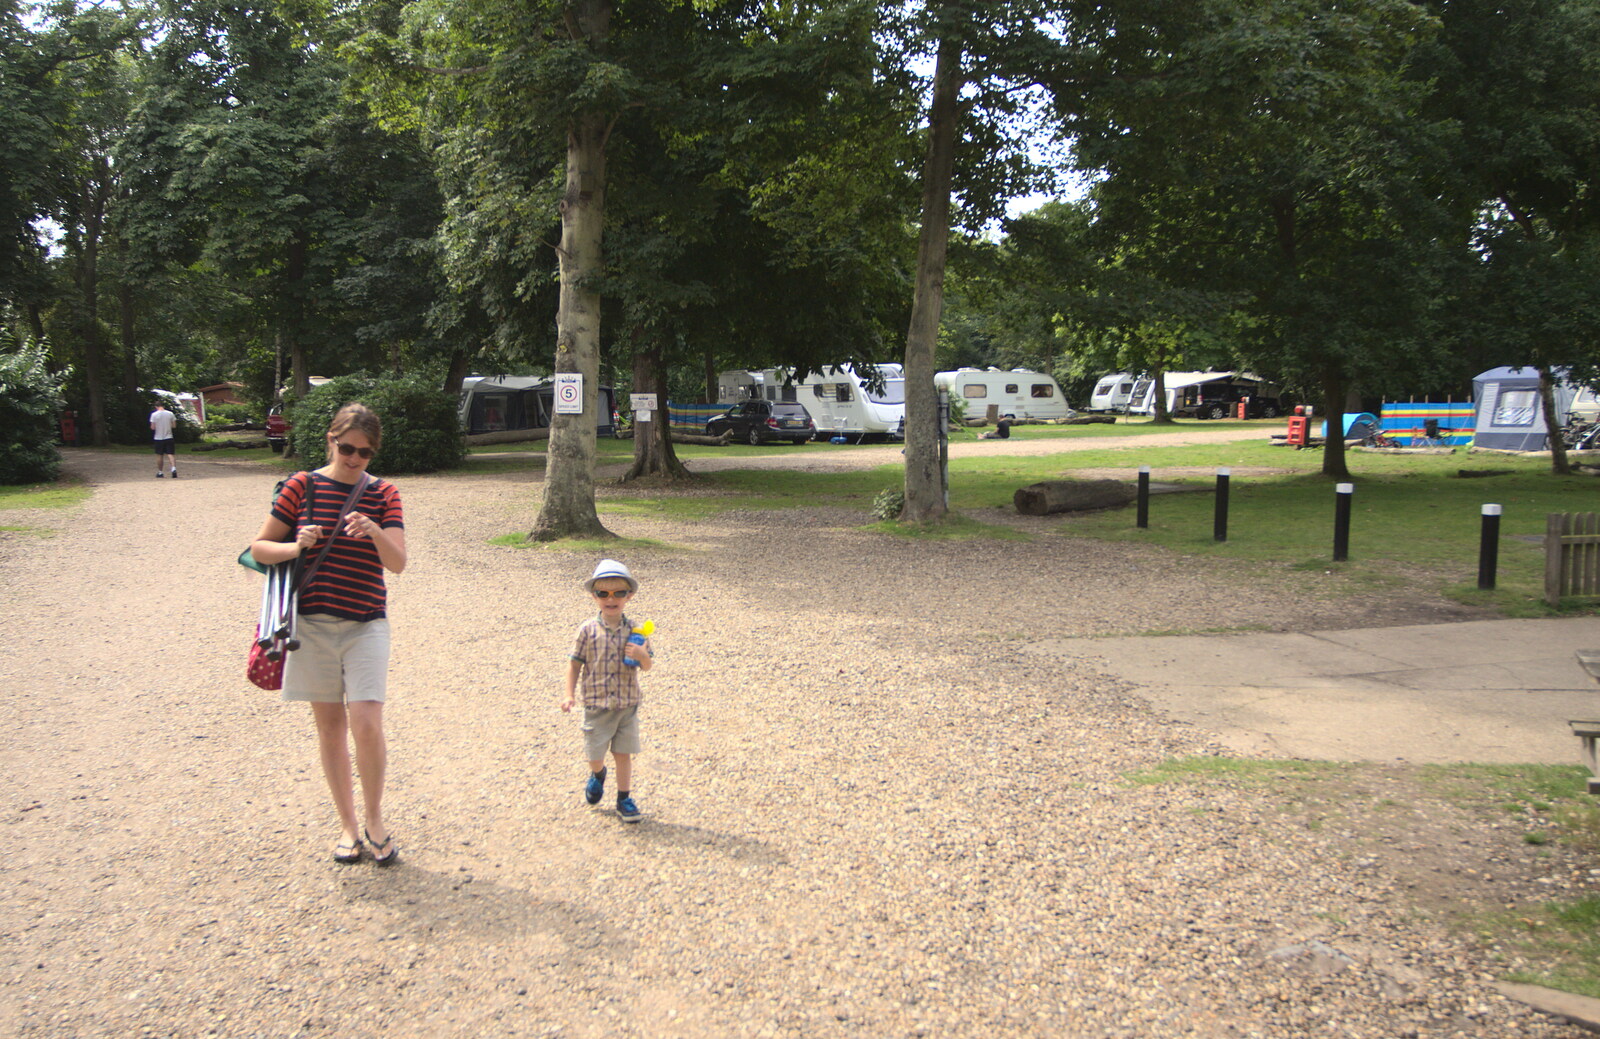 Isobel and Harry roam around from The Archaeology of Dunwich: A Camping Trip, Dunwich, Suffolk - 1st August 2015